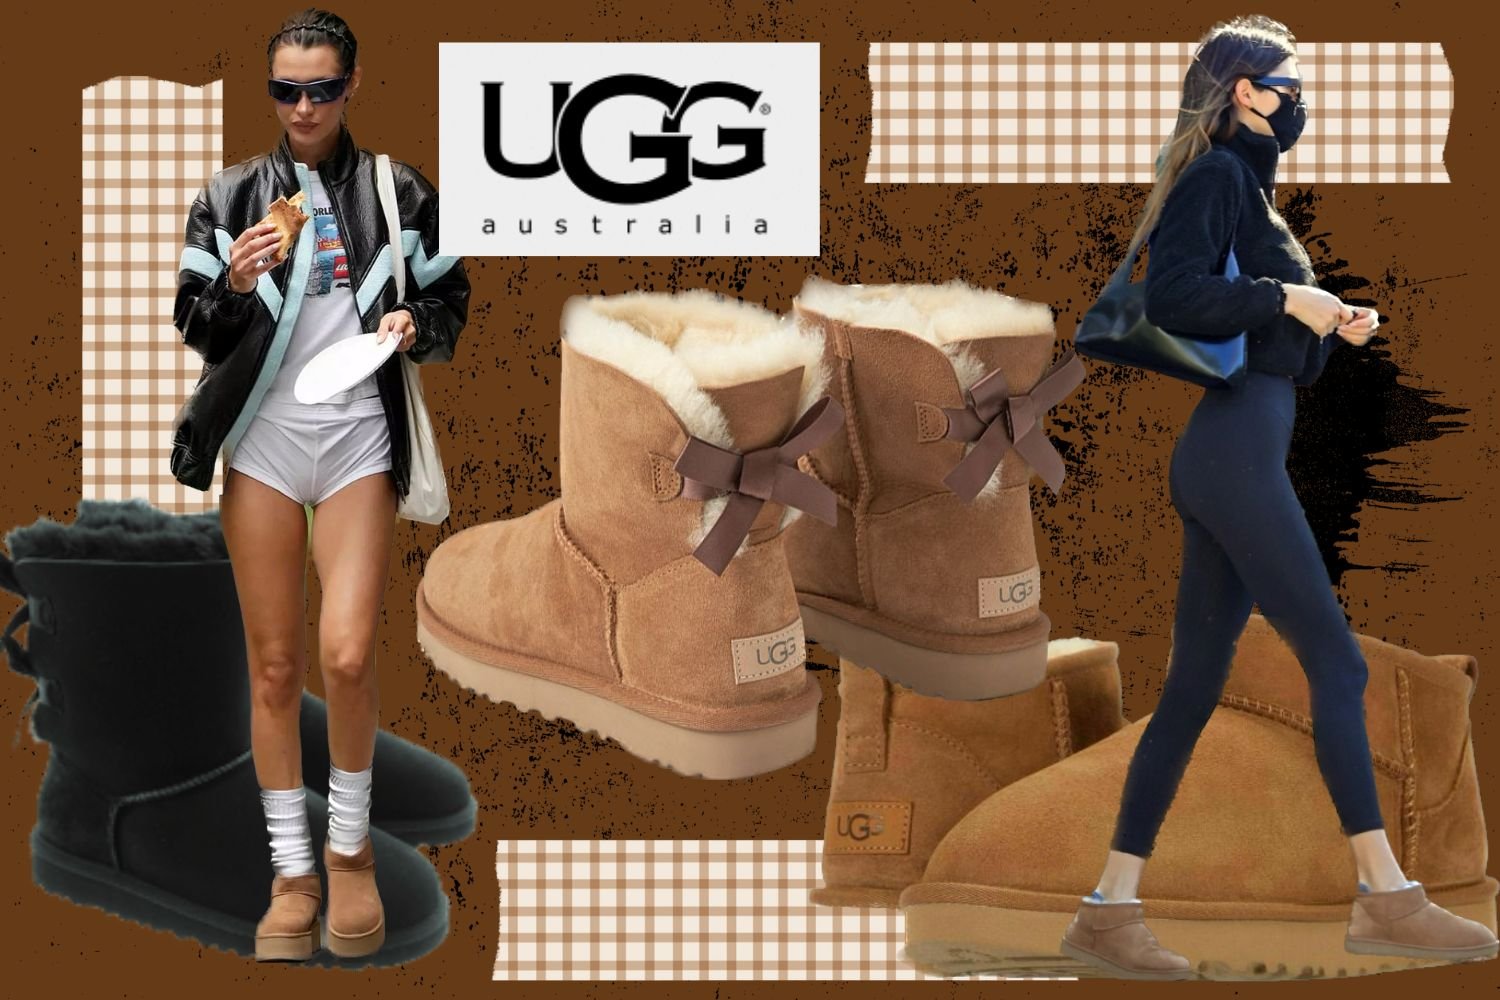 How Ugg is making a major comeback 20 years after its heyday